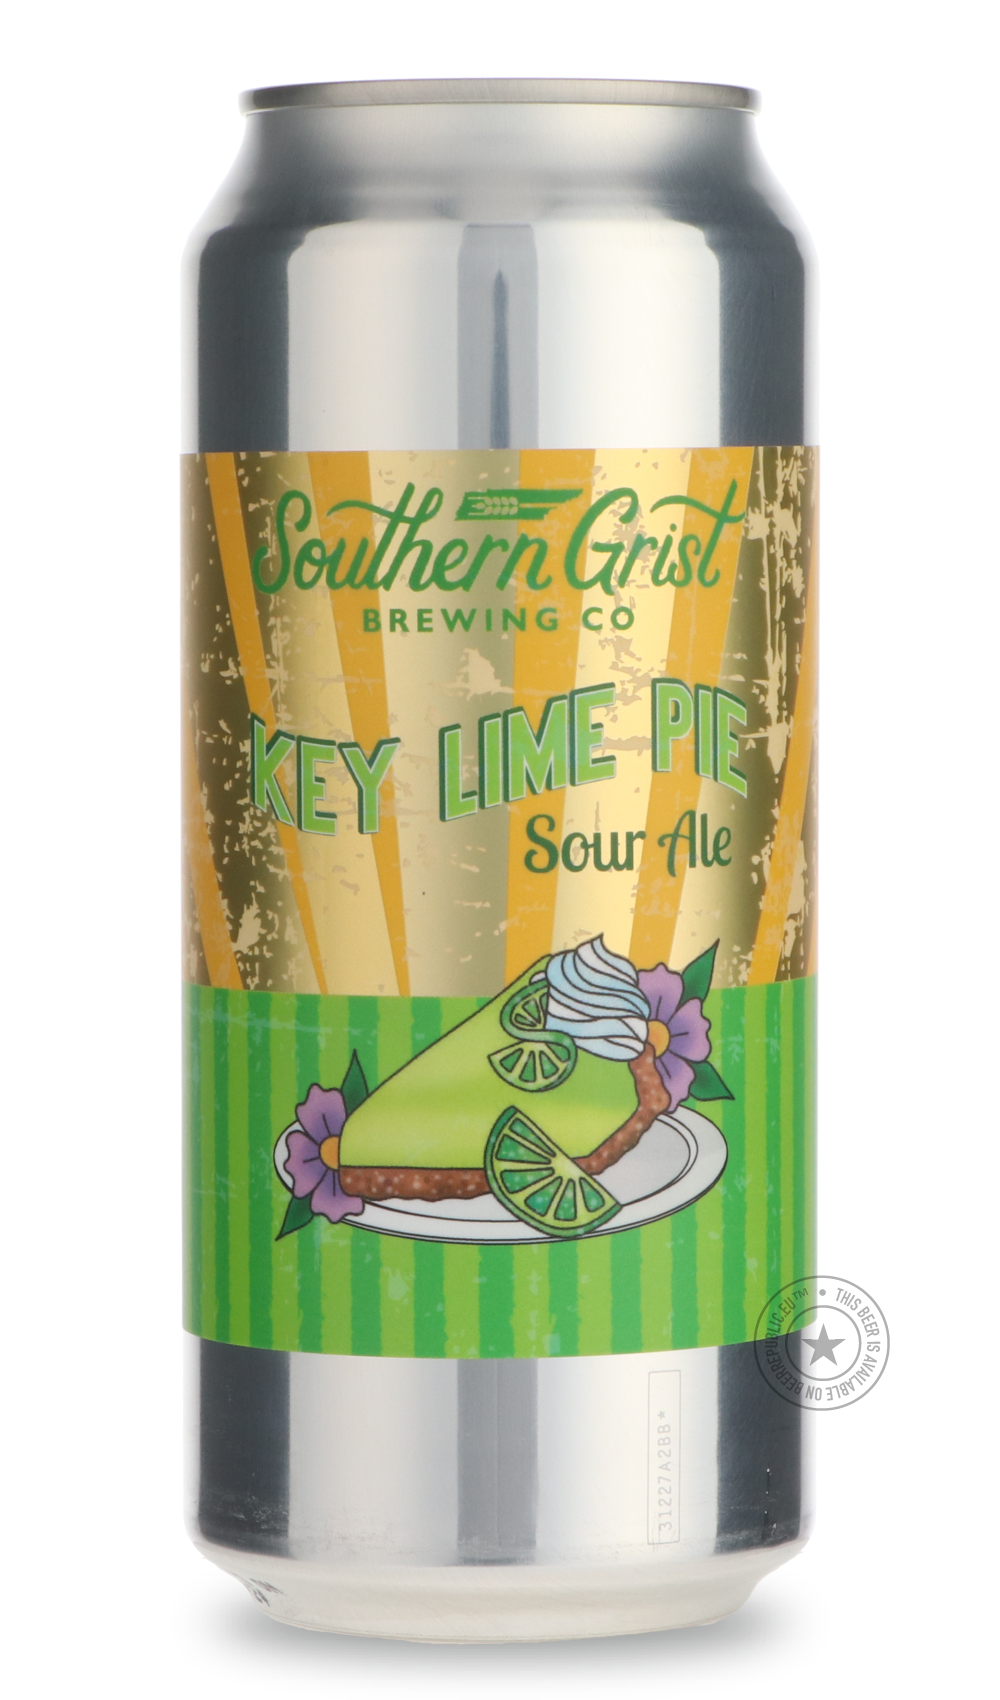 -Southern Grist- Key Lime Pie Sour-Sour / Wild & Fruity- Only @ Beer Republic - The best online beer store for American & Canadian craft beer - Buy beer online from the USA and Canada - Bier online kopen - Amerikaans bier kopen - Craft beer store - Craft beer kopen - Amerikanisch bier kaufen - Bier online kaufen - Acheter biere online - IPA - Stout - Porter - New England IPA - Hazy IPA - Imperial Stout - Barrel Aged - Barrel Aged Imperial Stout - Brown - Dark beer - Blond - Blonde - Pilsner - Lager - Wheat 